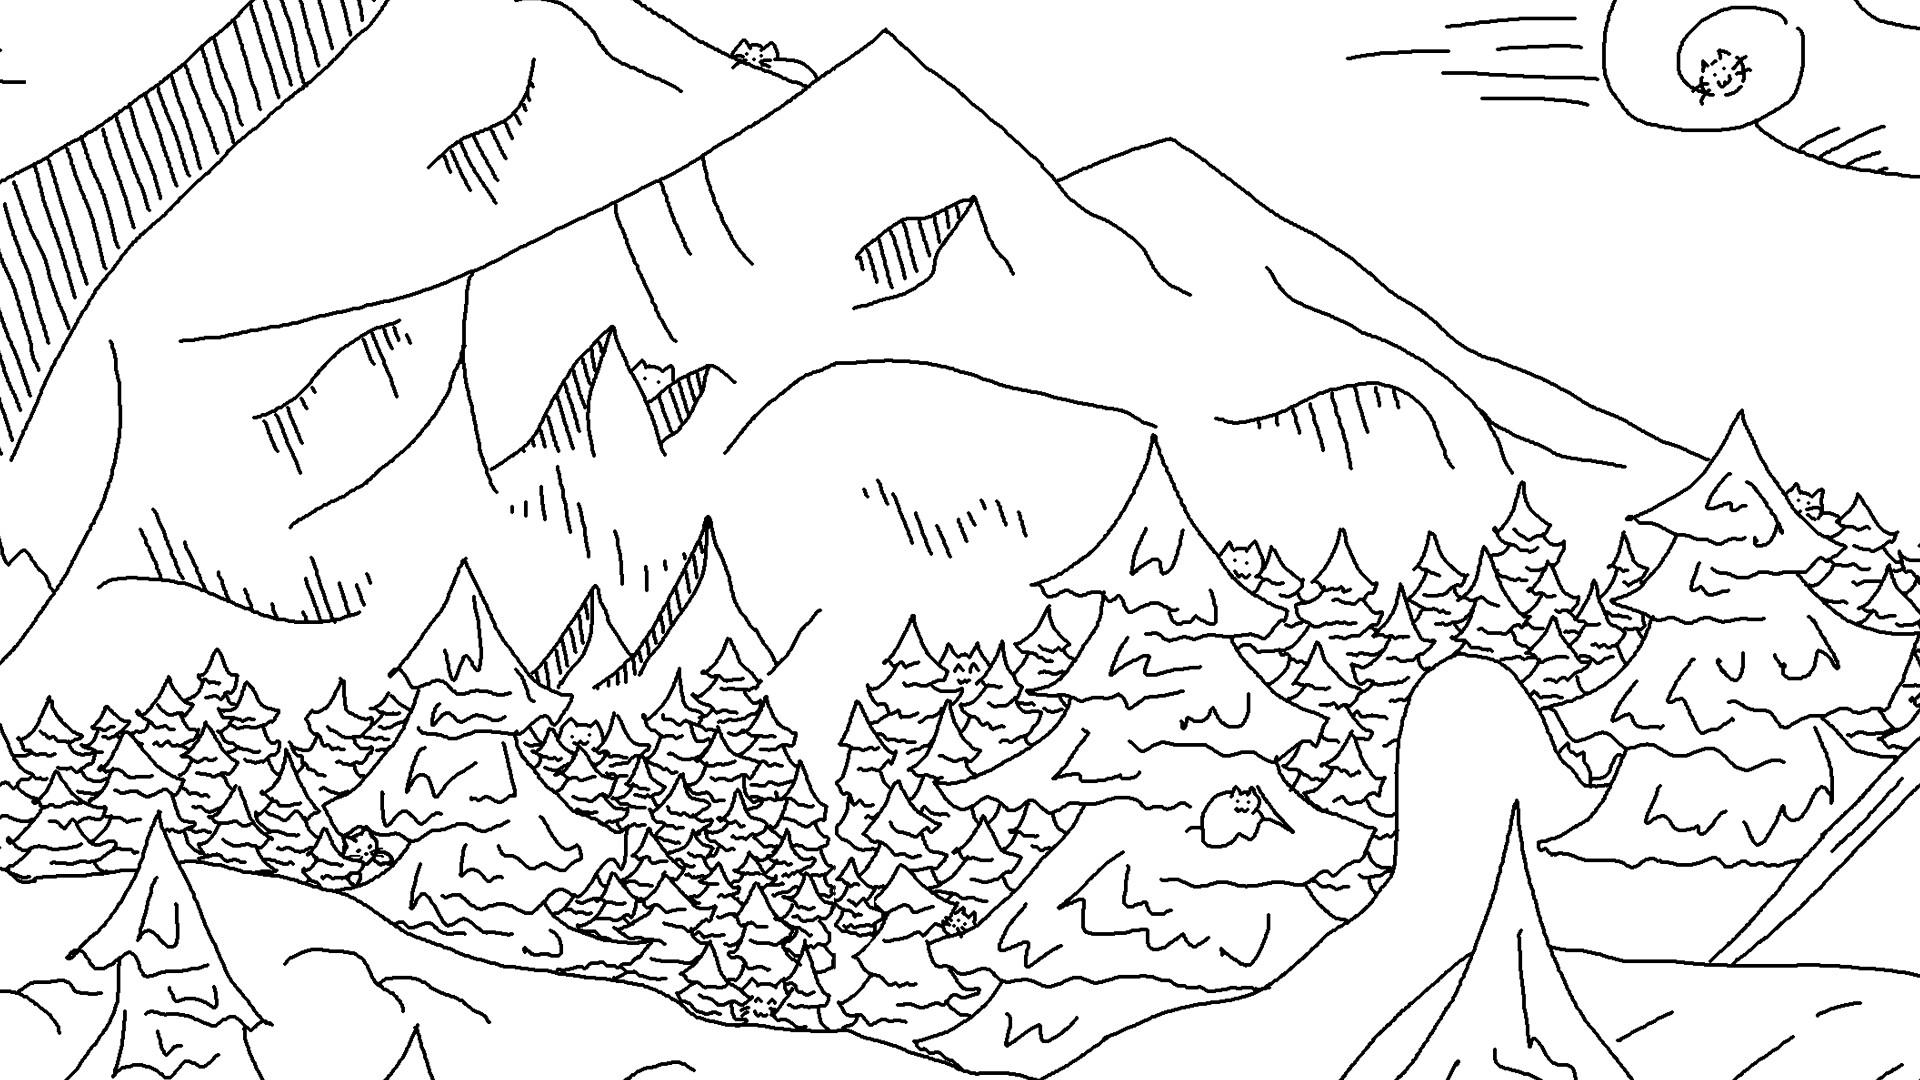 Screenshot of Looking For Cats In a Badly Drawn Forest